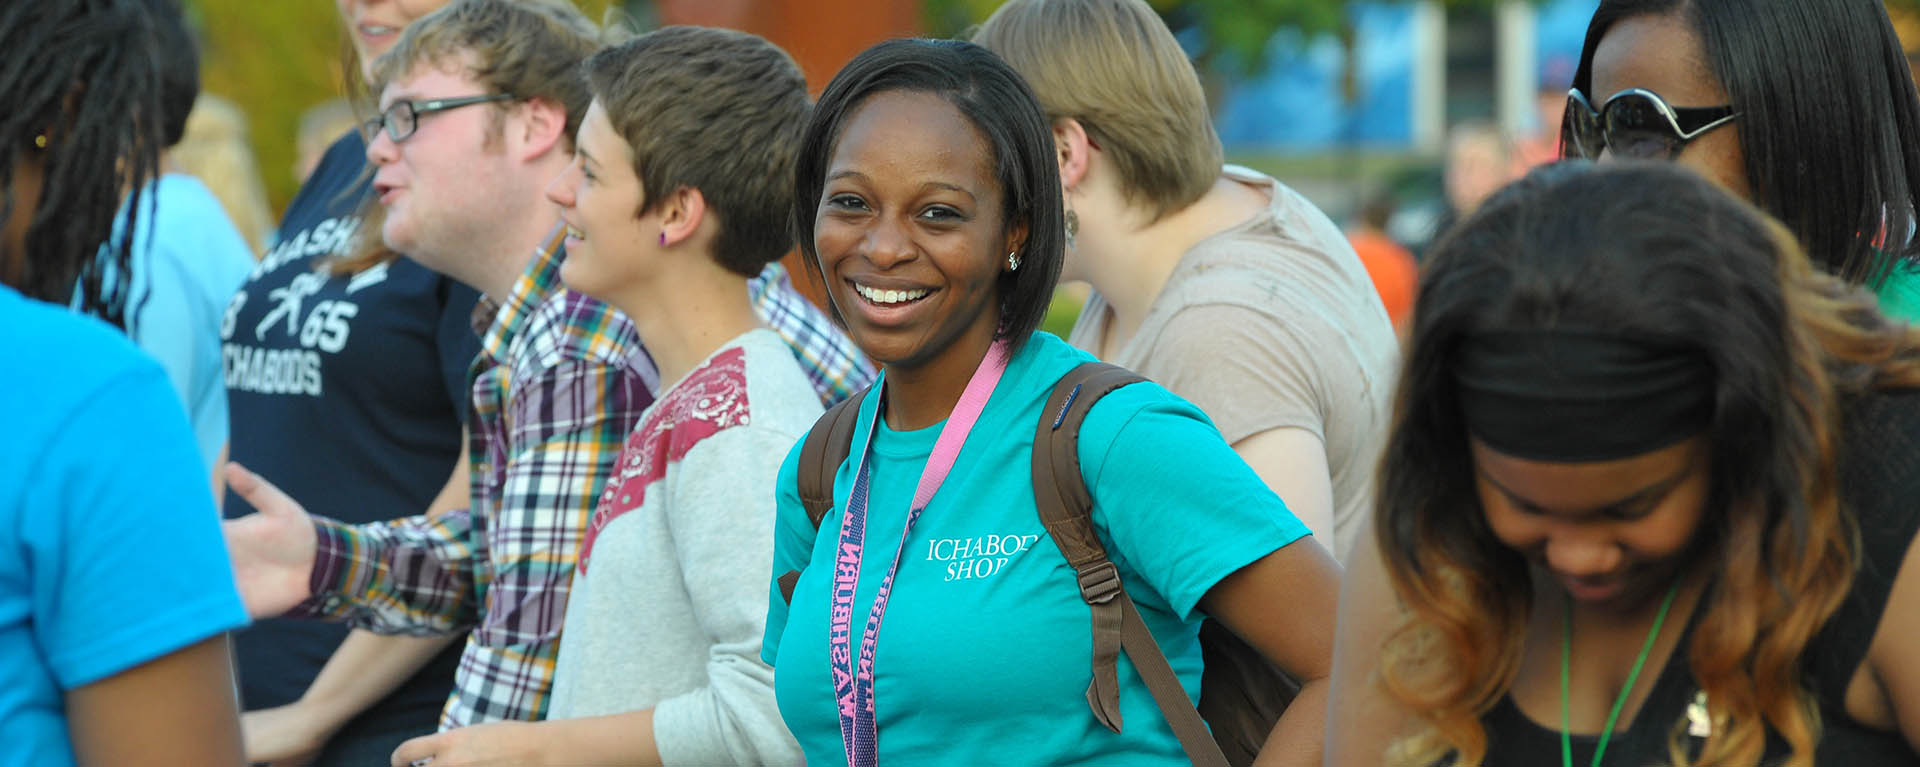 Image of a student smiling